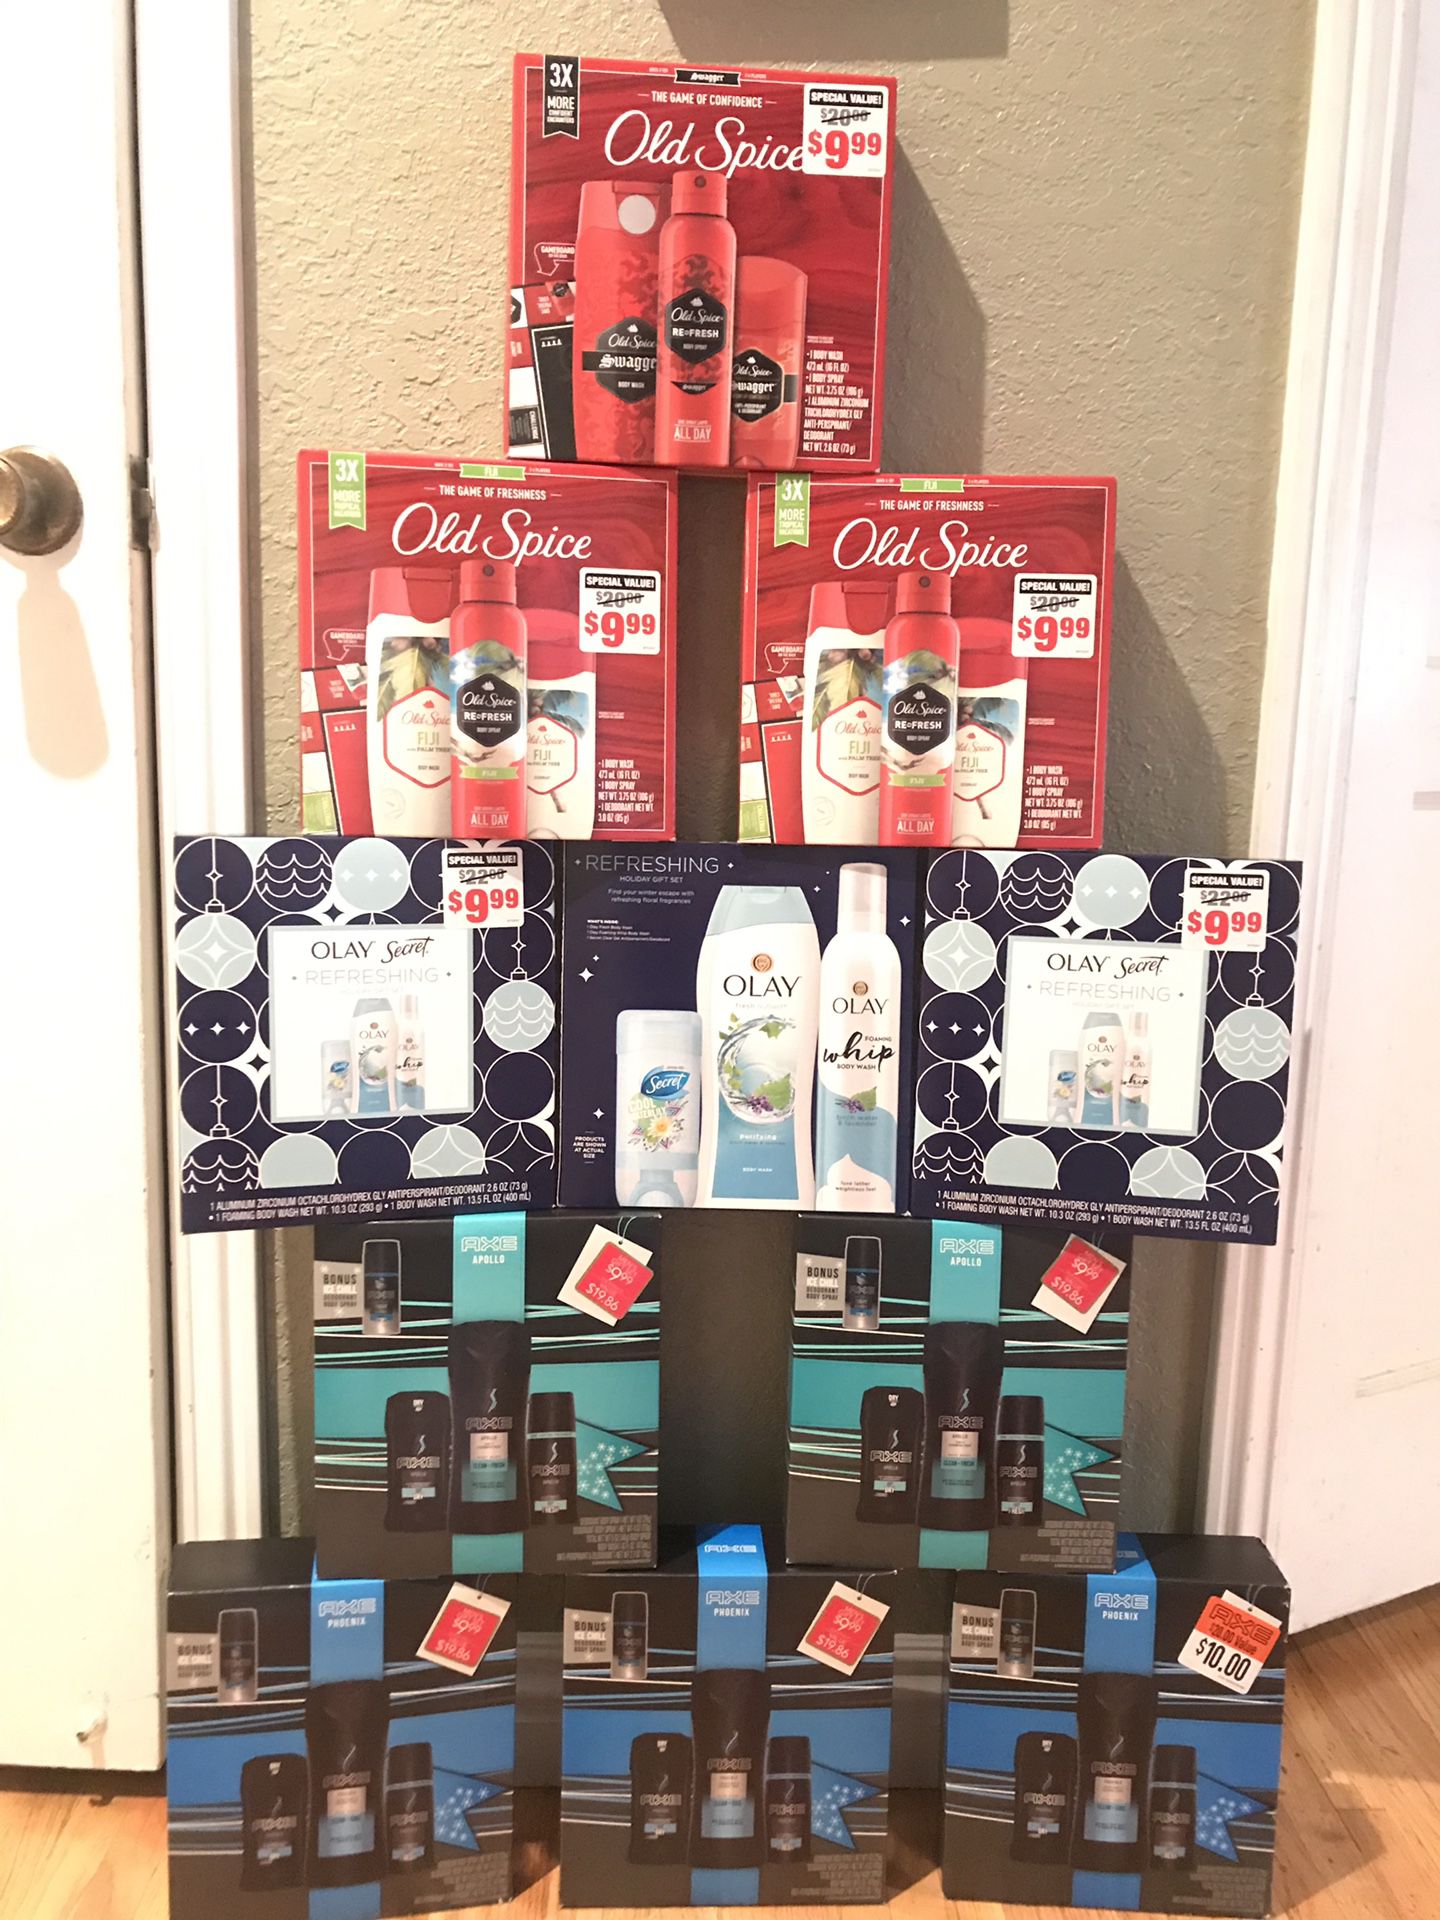 Axe Old Spice Olay Gift Sets $7 EA. Or 3/$20📍NO DELIVERY📍READ DESCRIPTION FOR LOCATION📍